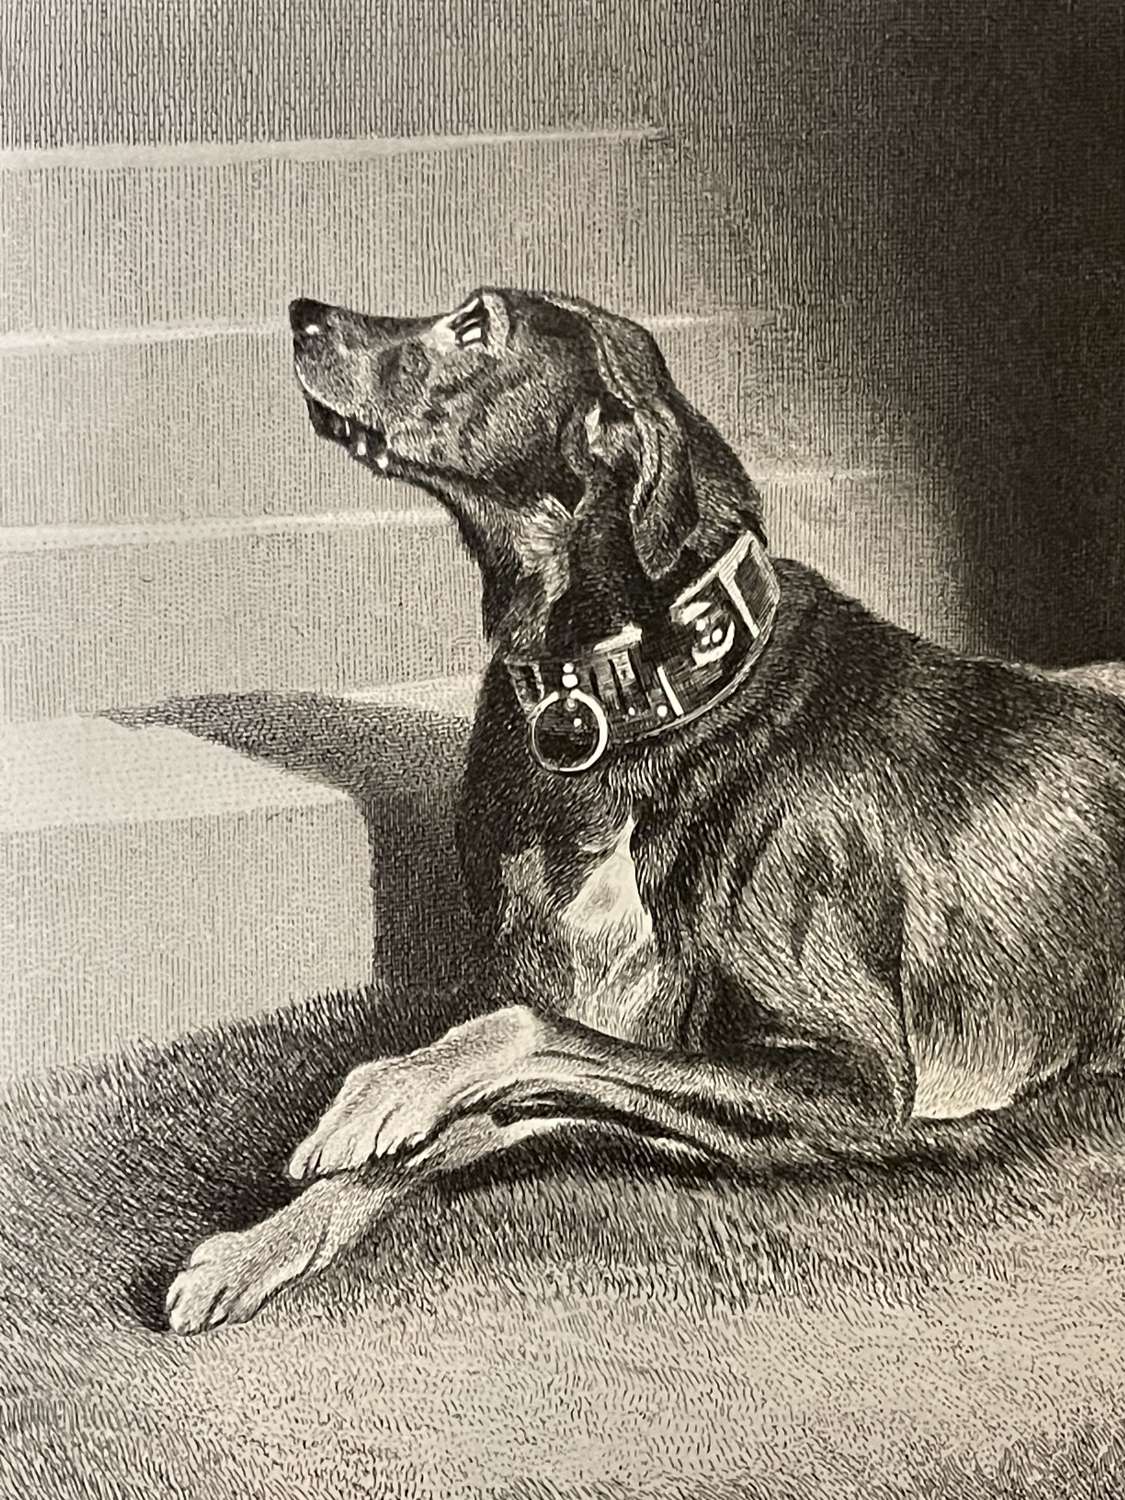 “Waiting  for the Countess” Sir Edward Landseer 19th Century engraving